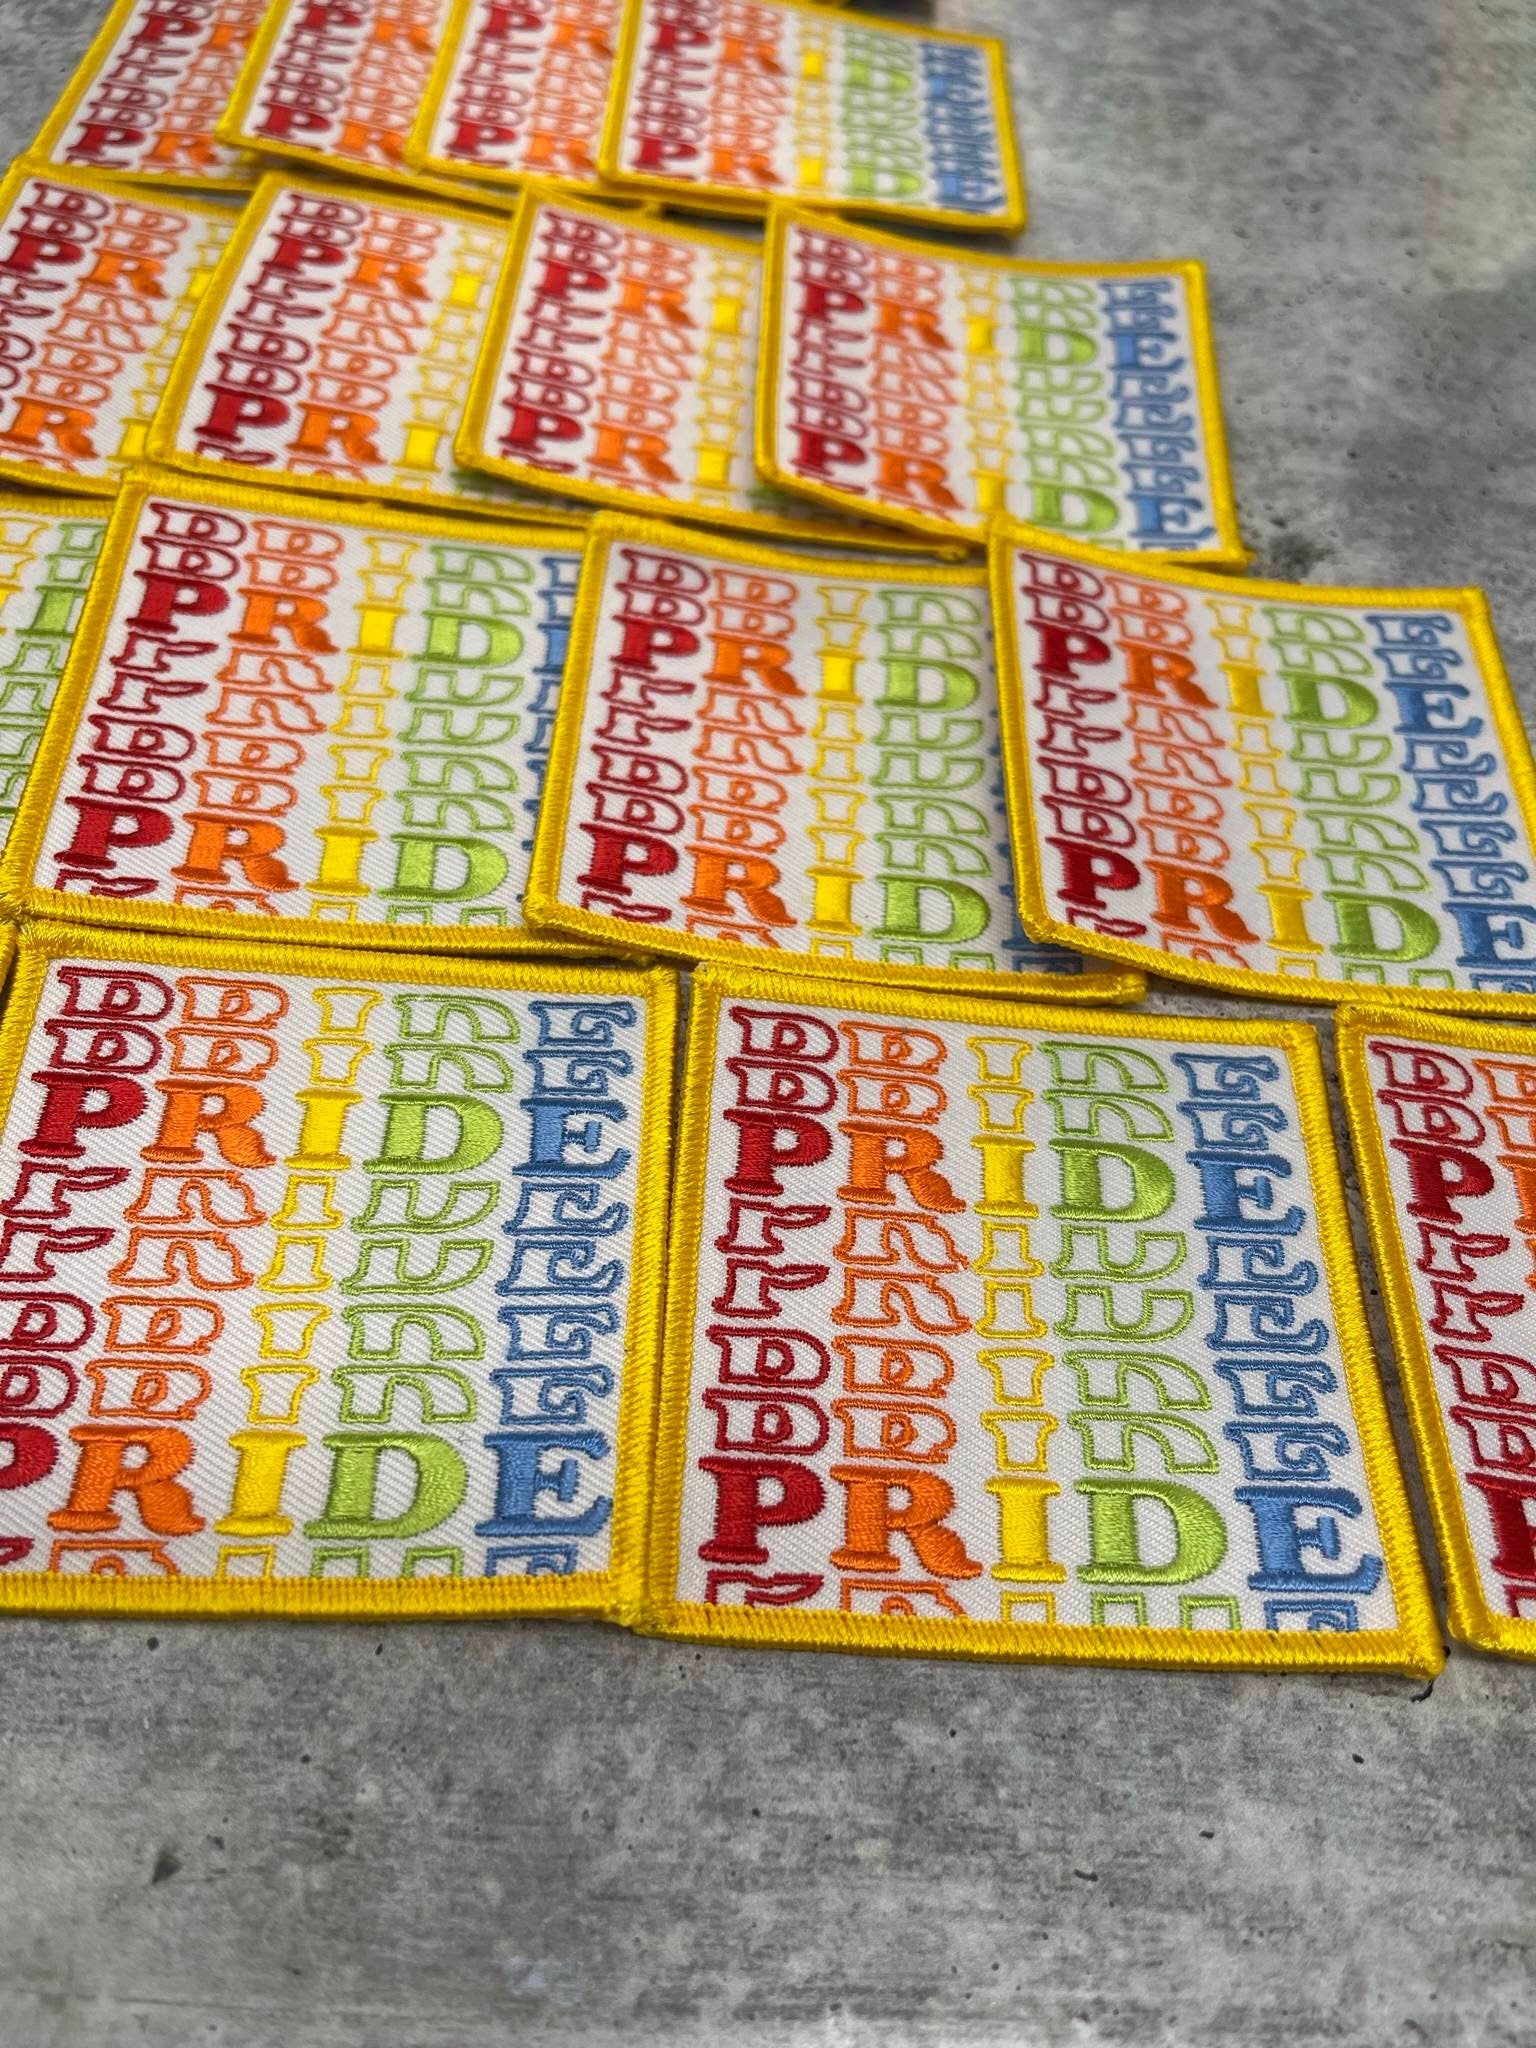 Pride Collection: 1-pc, PRIDE Rainbow Bag, Sz 3"x3" Embroidered Iron-on Patch/LGBTQ Patch for Jackets, Hats, Crocs, Bags, & More,Pride Gifts